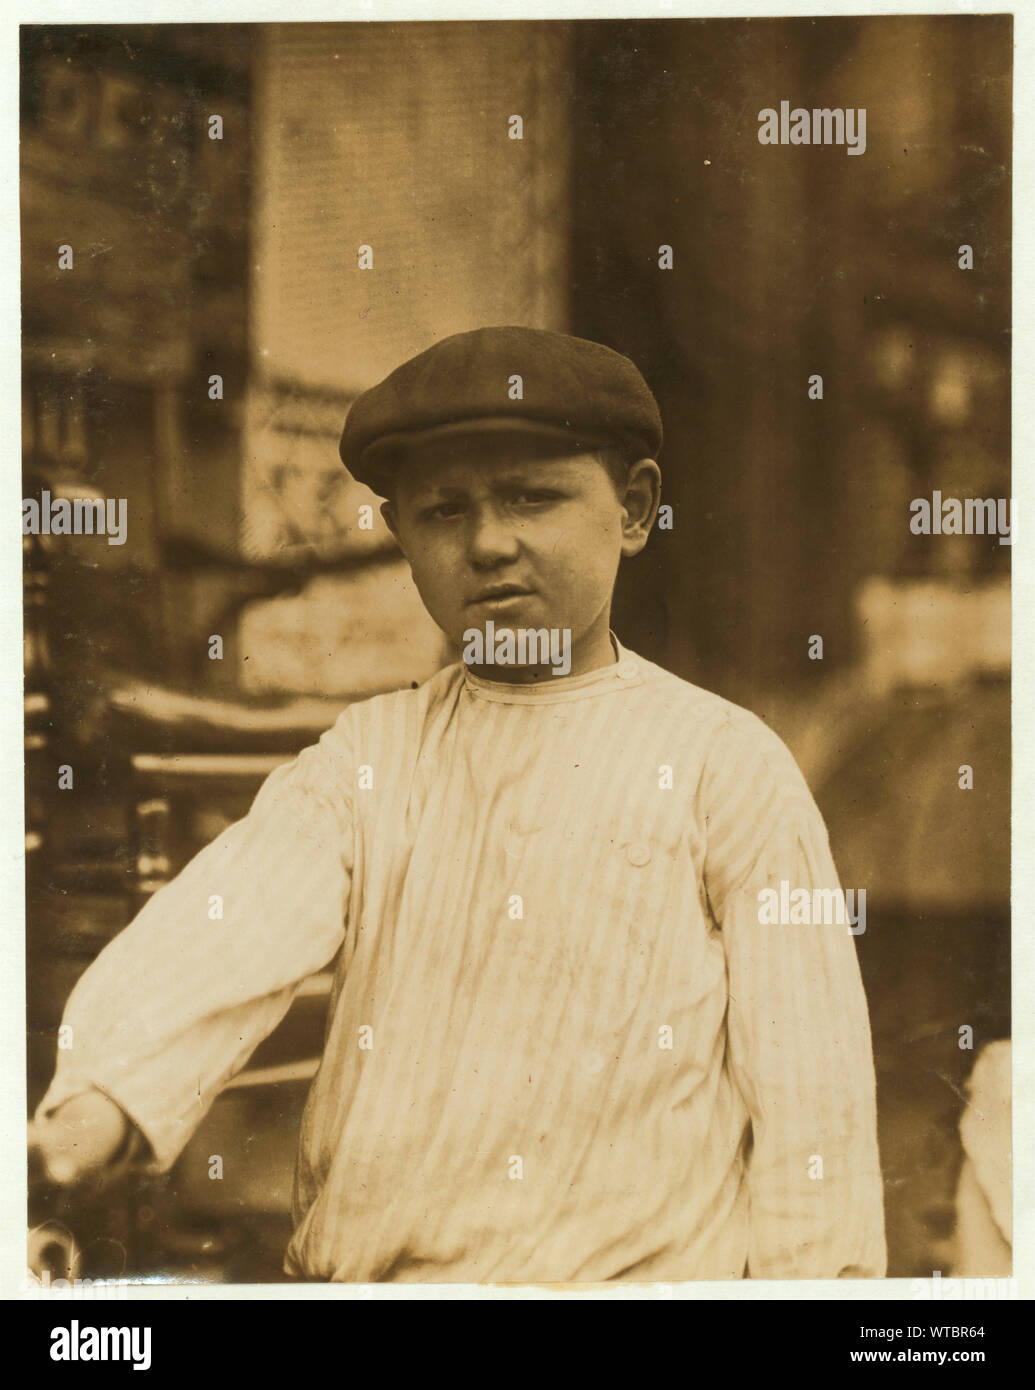 Michael Mero, 2 West 4th St., Bootblack, 12 years of age, working one year of own volition. Don't smoke. Out after 11 P.M. on May 21, Ordinarily works 6 hours per day.  Photographs from the records of the National Child Labor Committee (U.S.) Stock Photo